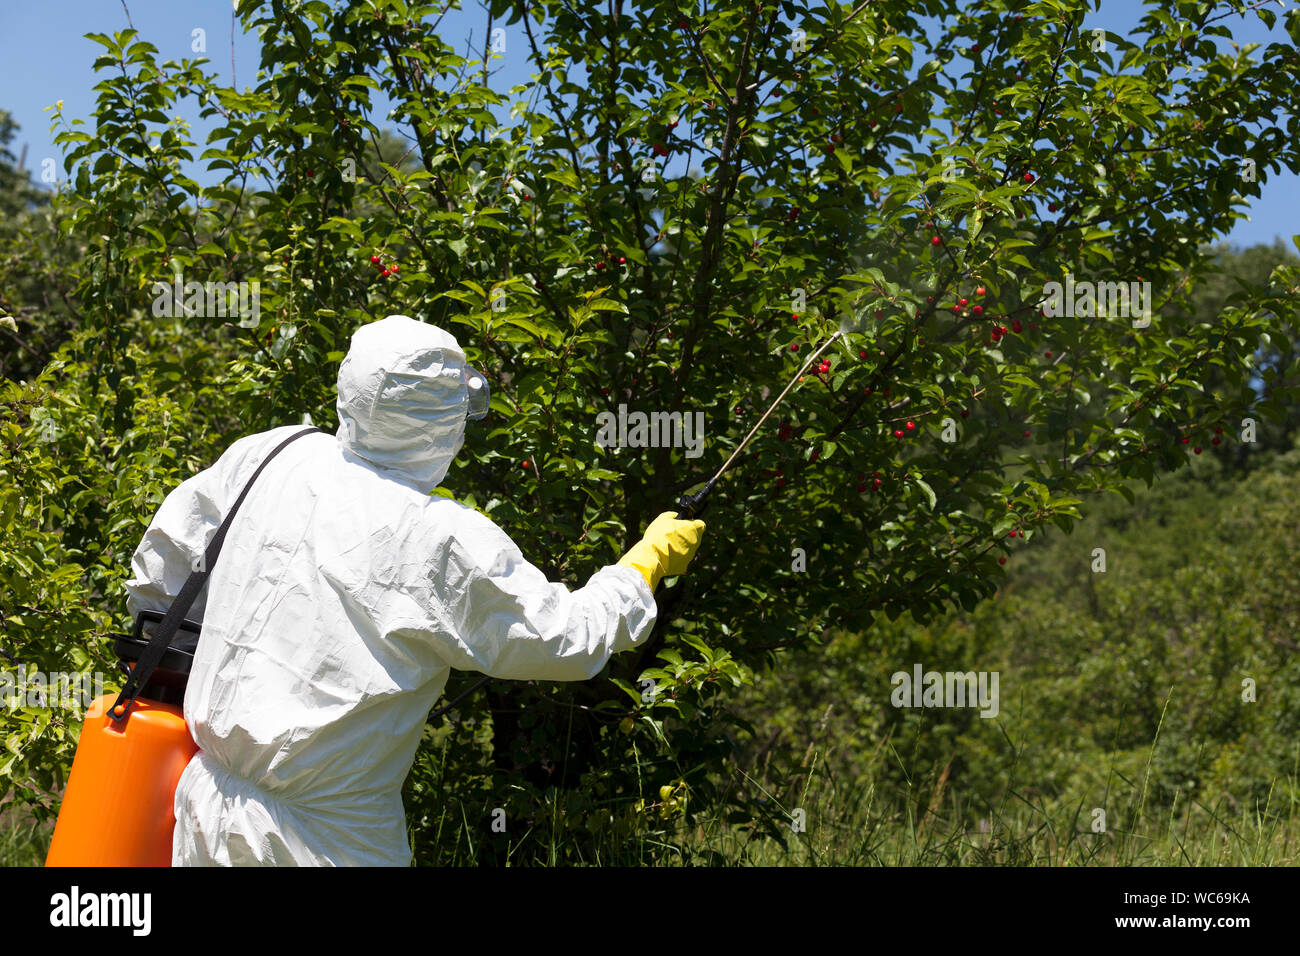 Rear View Of Worker Spraying Pesticide On Plants Stock Photo